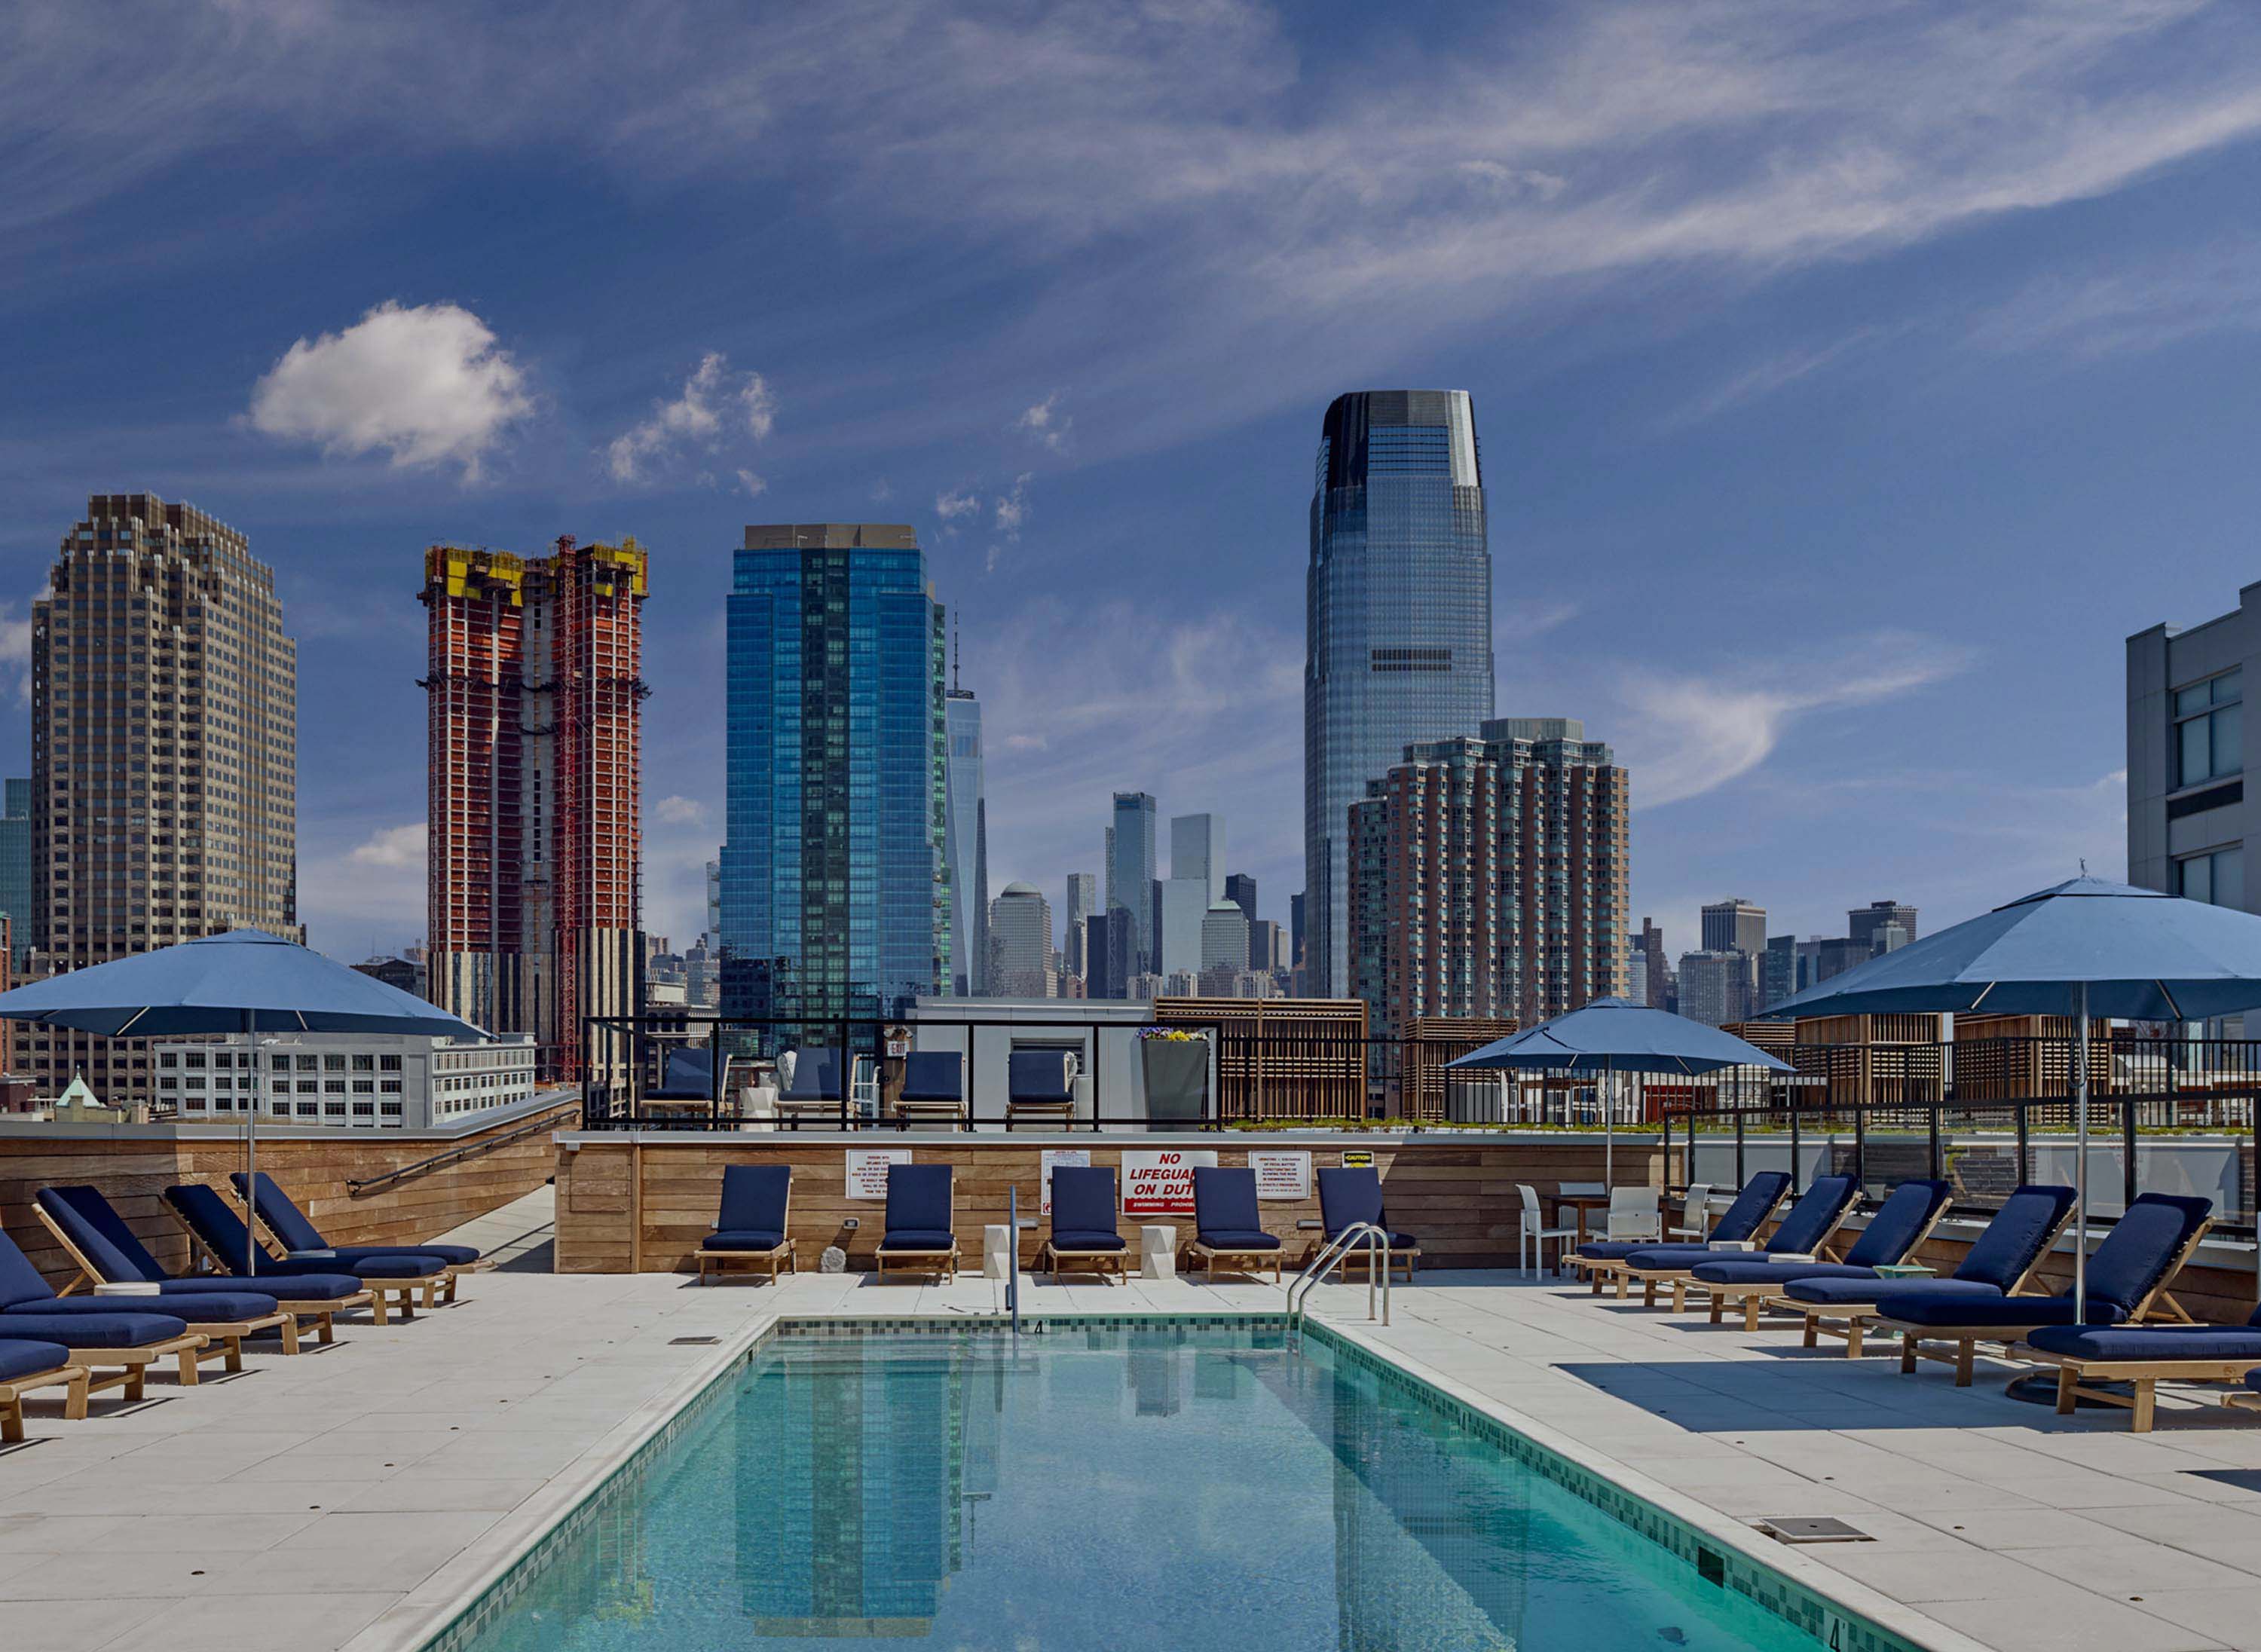 Rooftop pool deck with city views. Lounge chairs and umbrellas plus green lawn space.